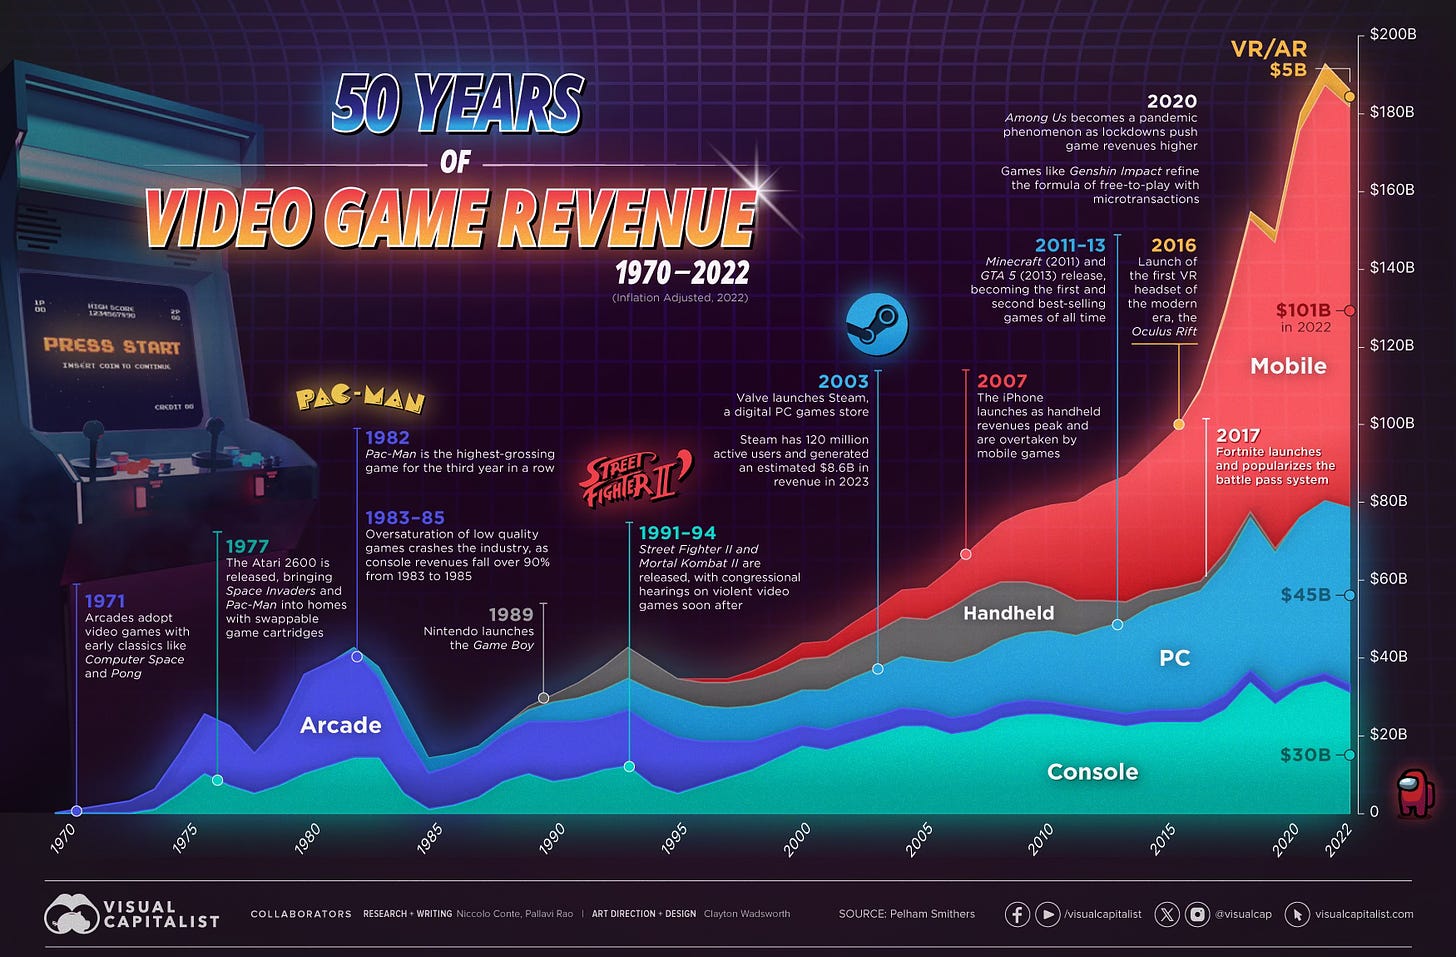 50 years of video game revenue